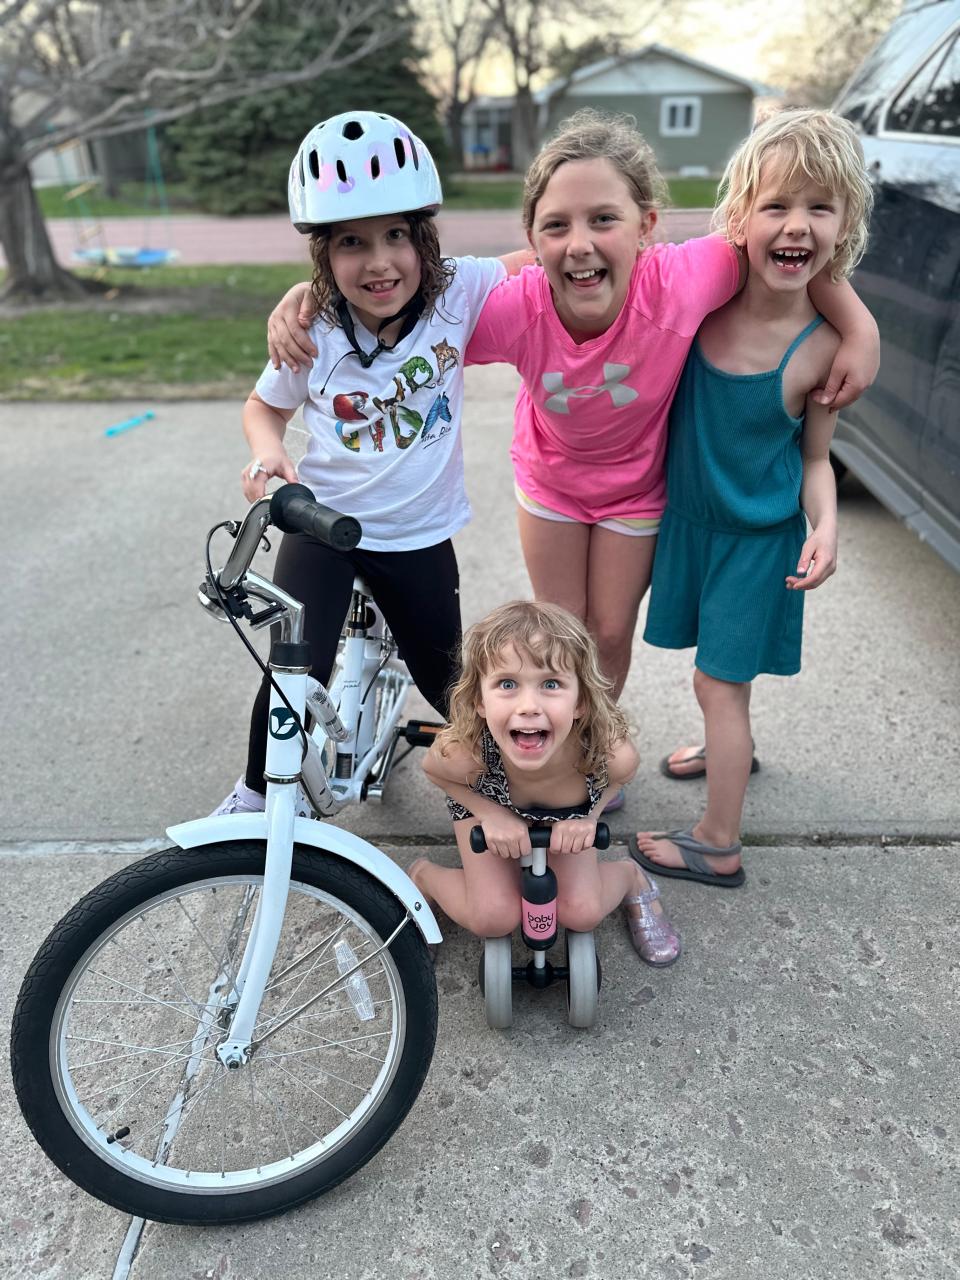 Four young girls smiling outside on bicycles.